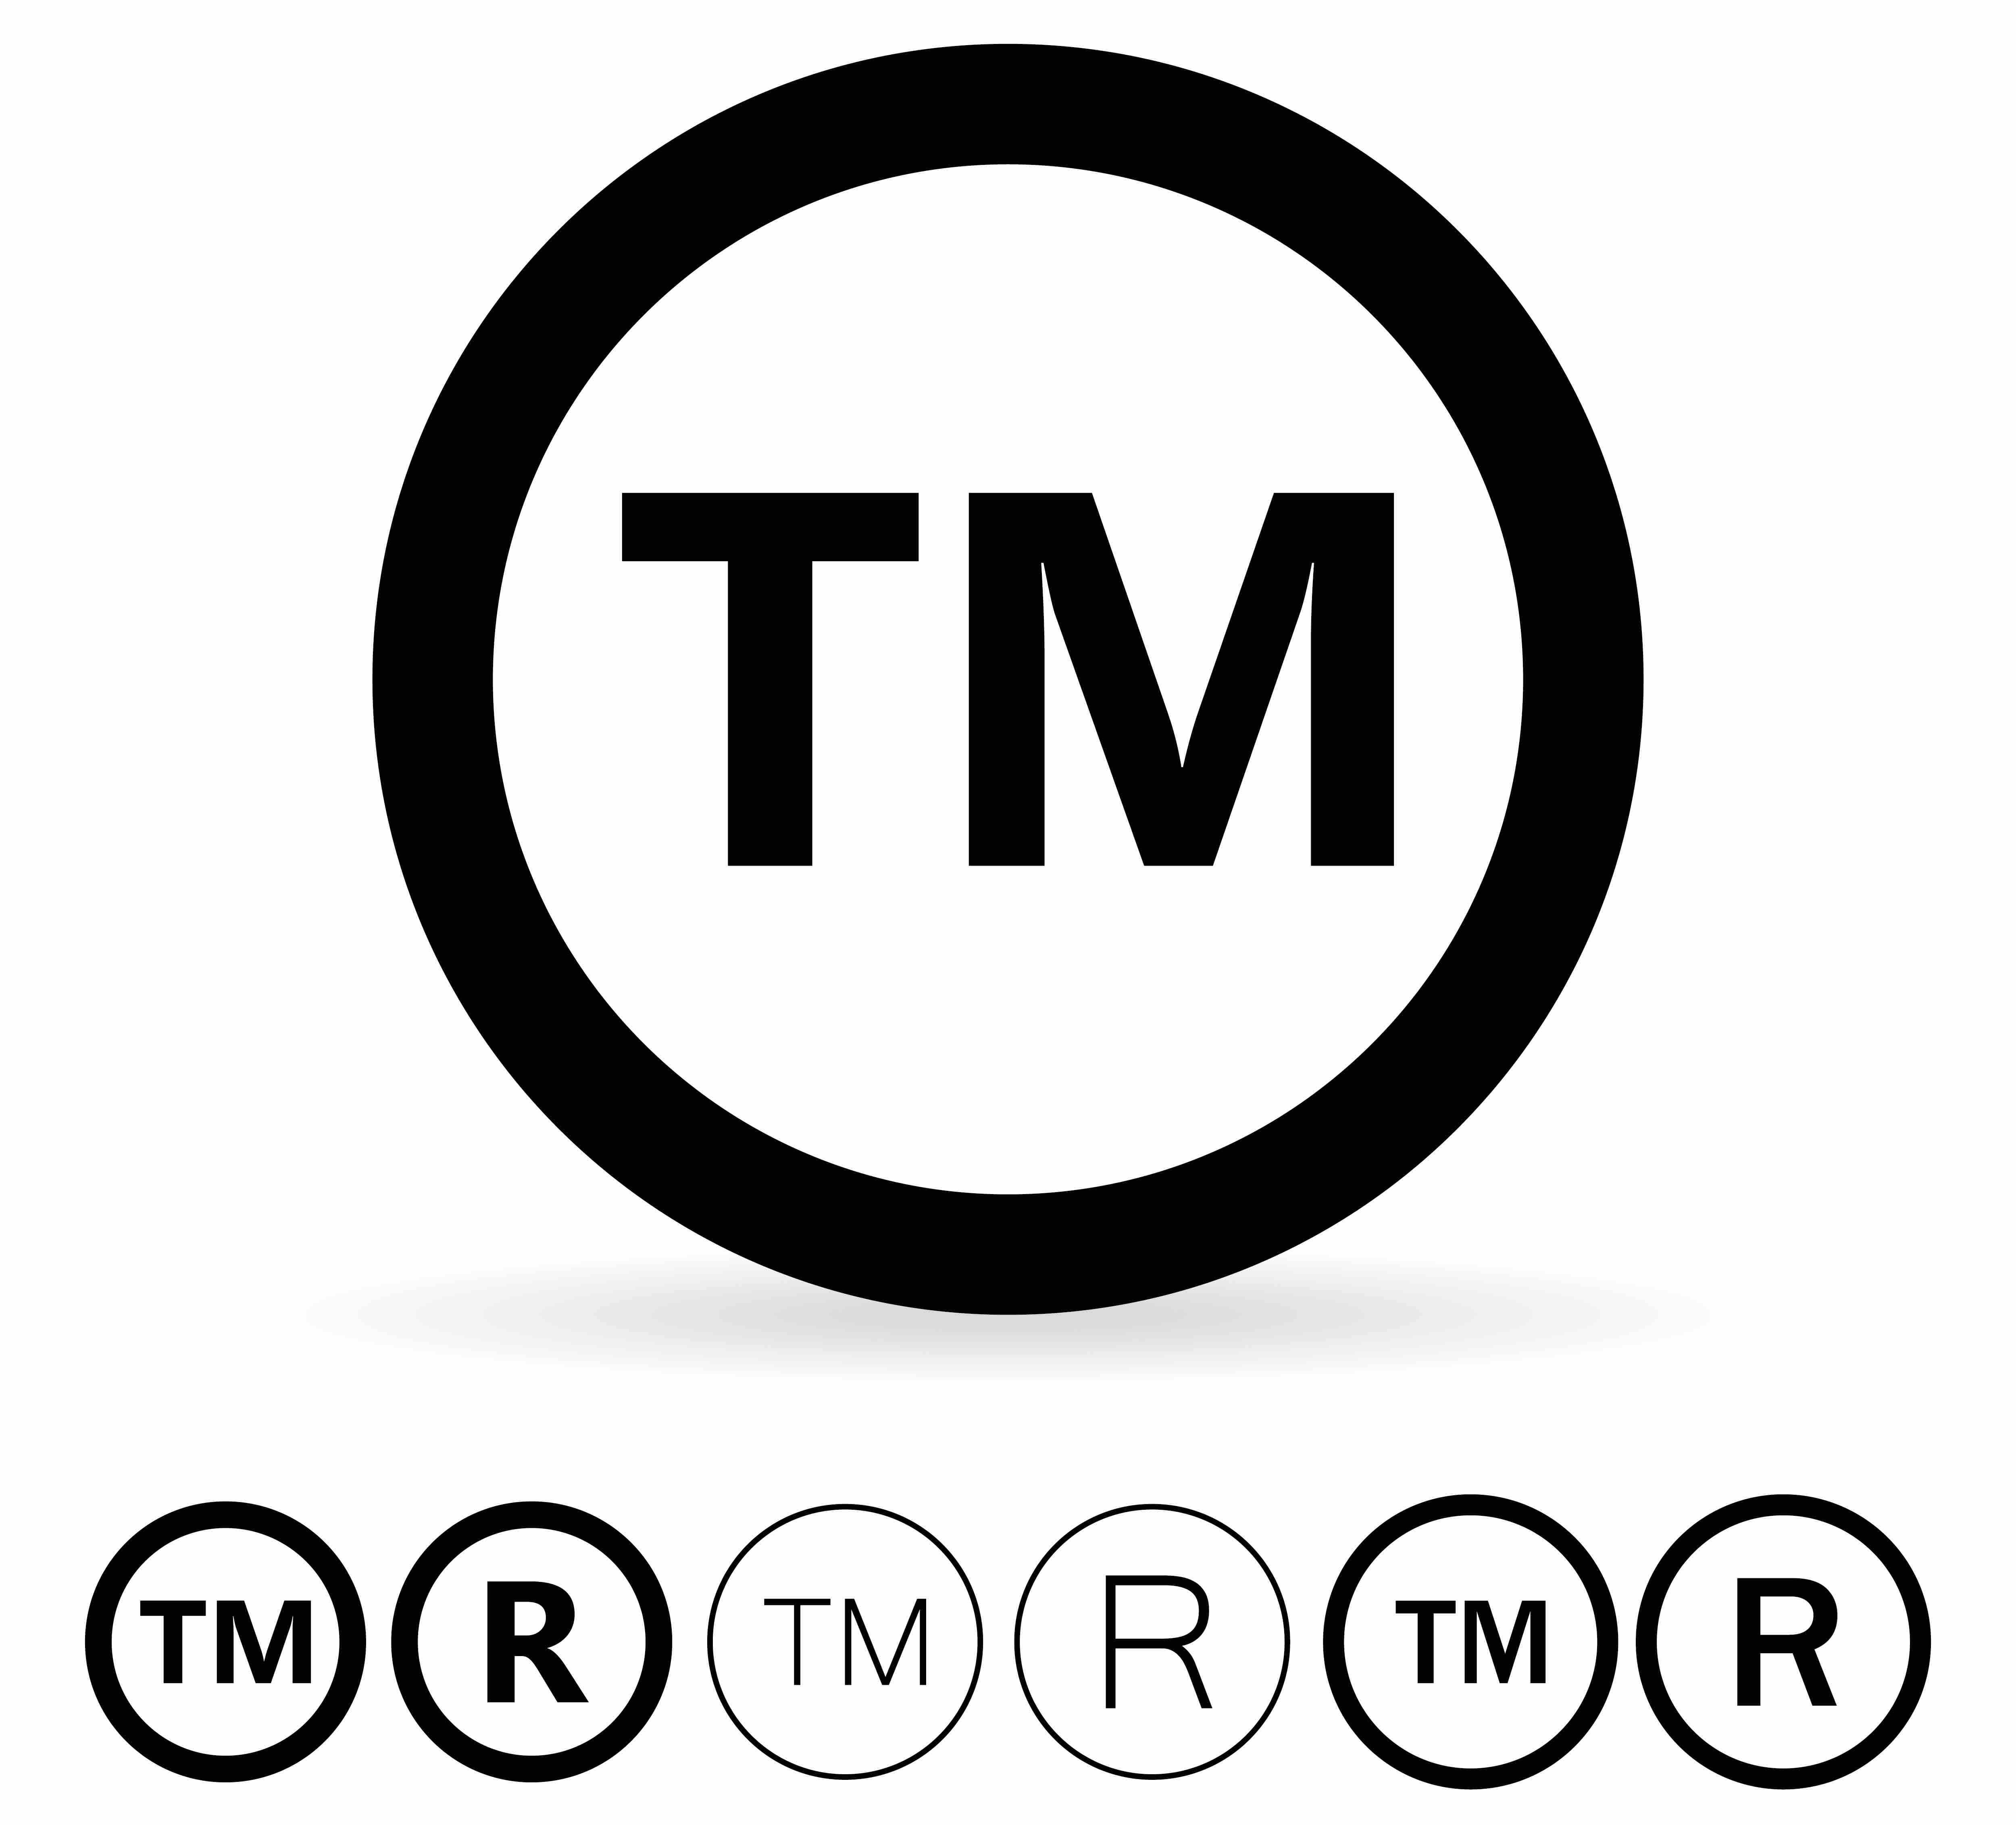 Circle R Trademark Logo - How to use trademark and registered trademark symbols - Cooper Mills